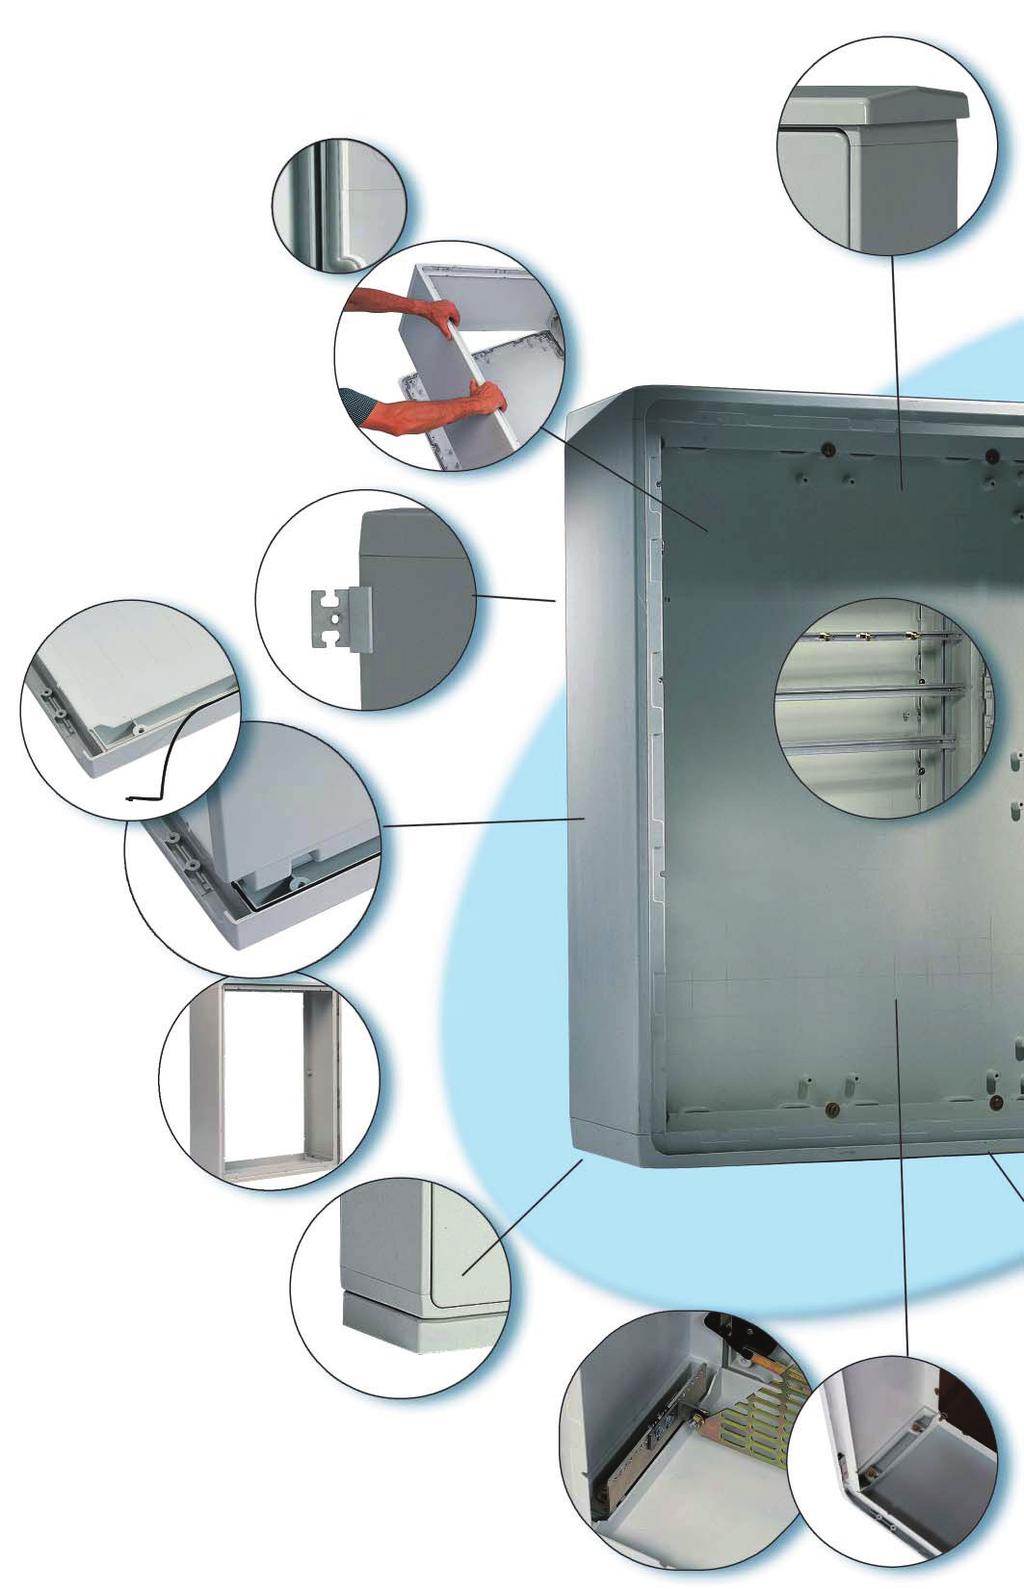 Wall mounting brackets - No mounting screws necessary - Can be mounted vertical or horizontal Backpanel - Enclosed in main structure - Has a seamless top panel as a result - No inserts - PUR sealing